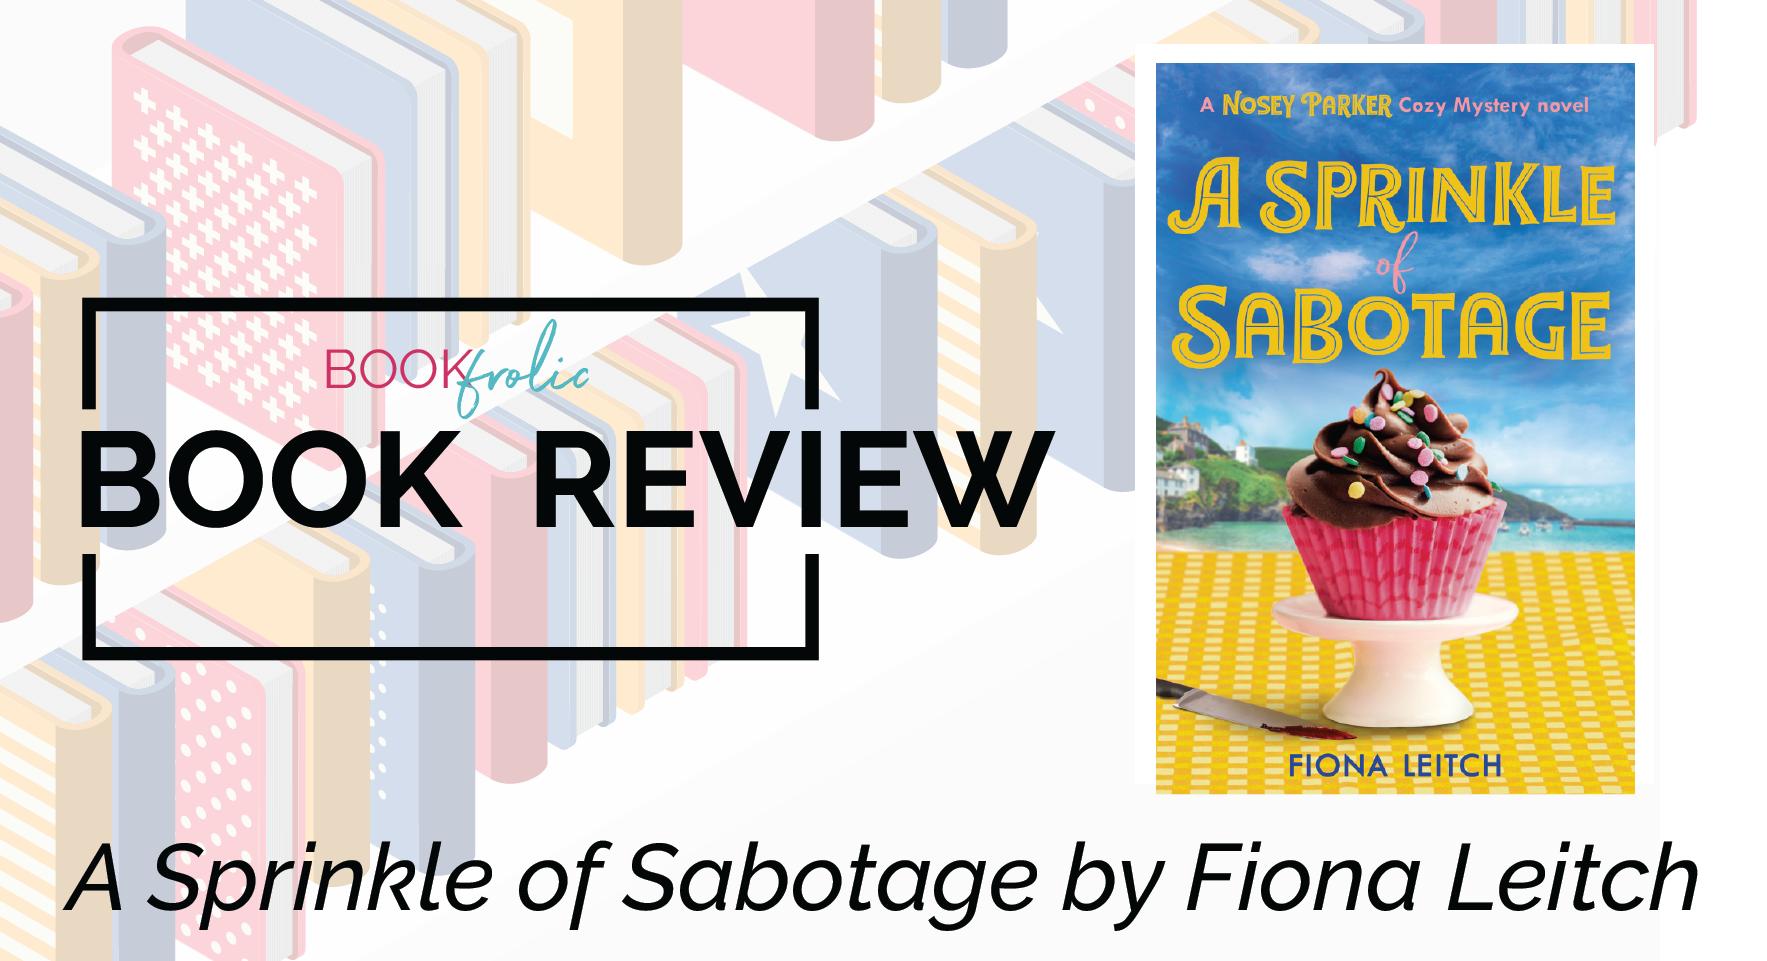 book review - A Sprinkle of Sabotage by Fiona Leitch